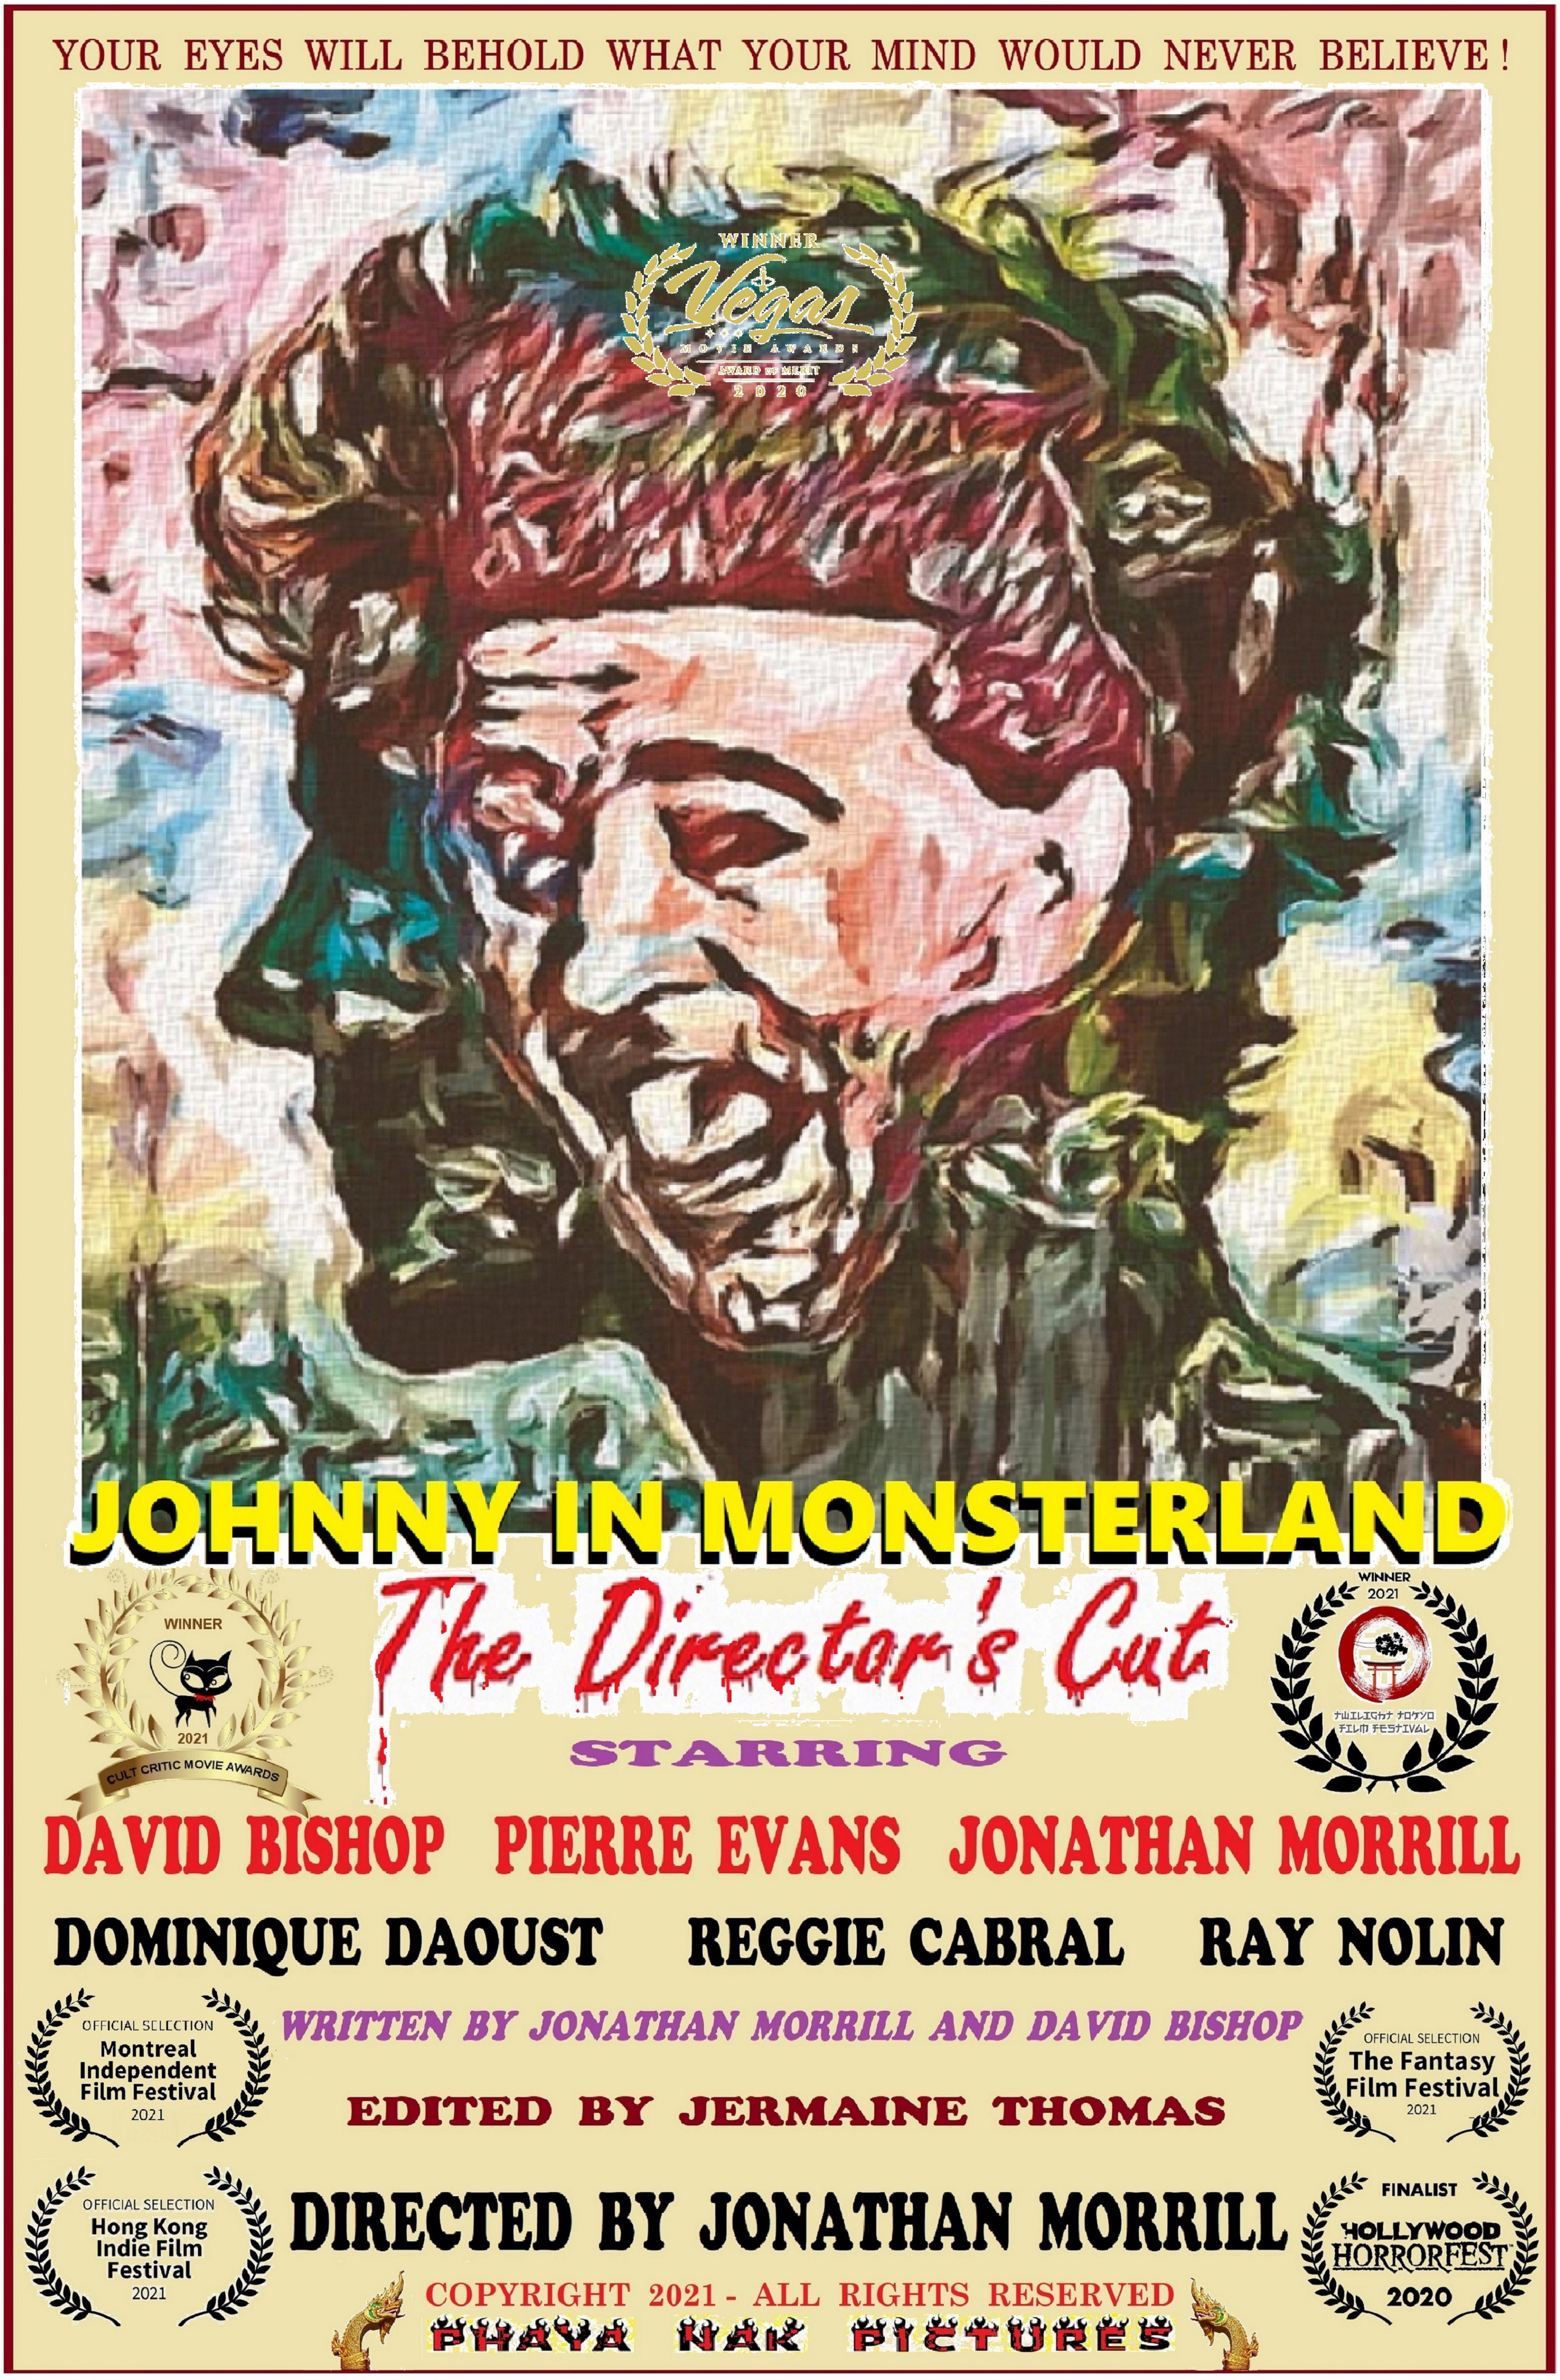 Johnny in Monsterland - The Directors Cut